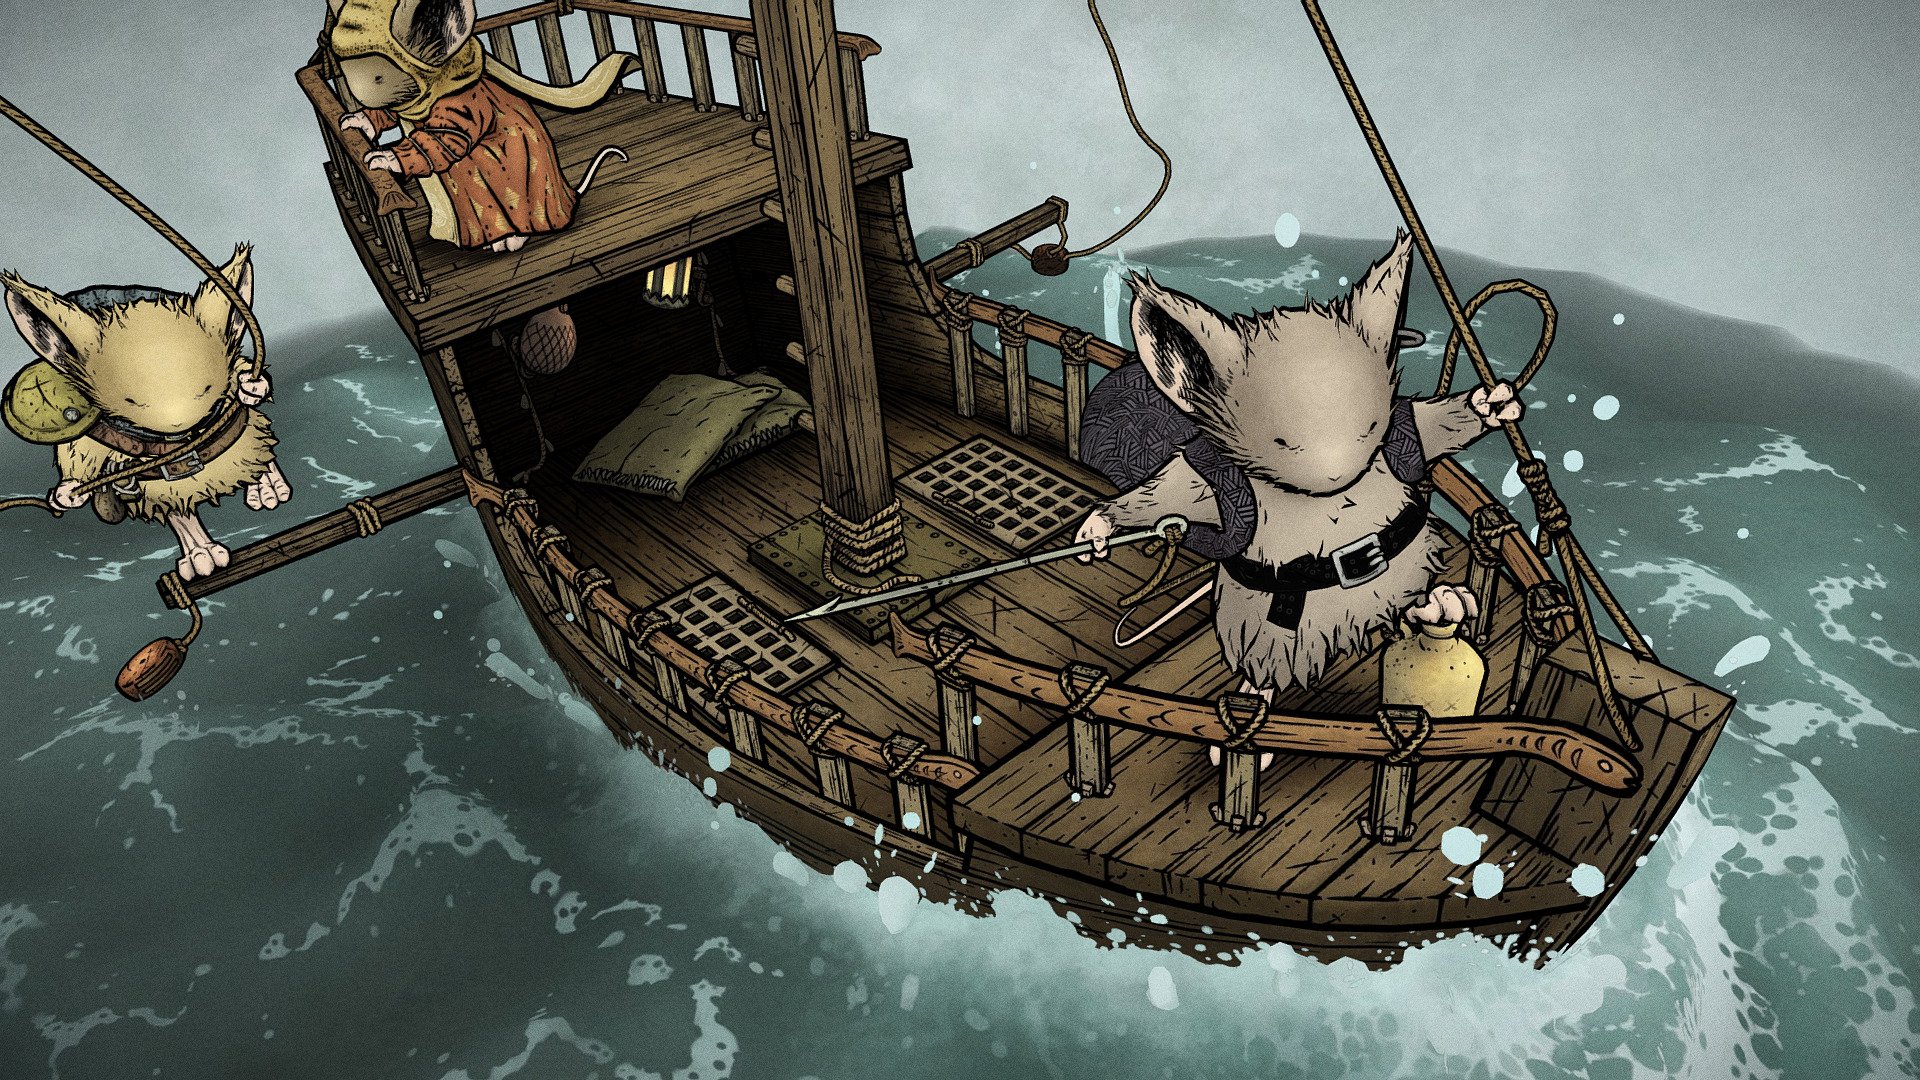 Based on the cover art of Mouse Guard: The Black Axe comic book by David Petersen 3d model